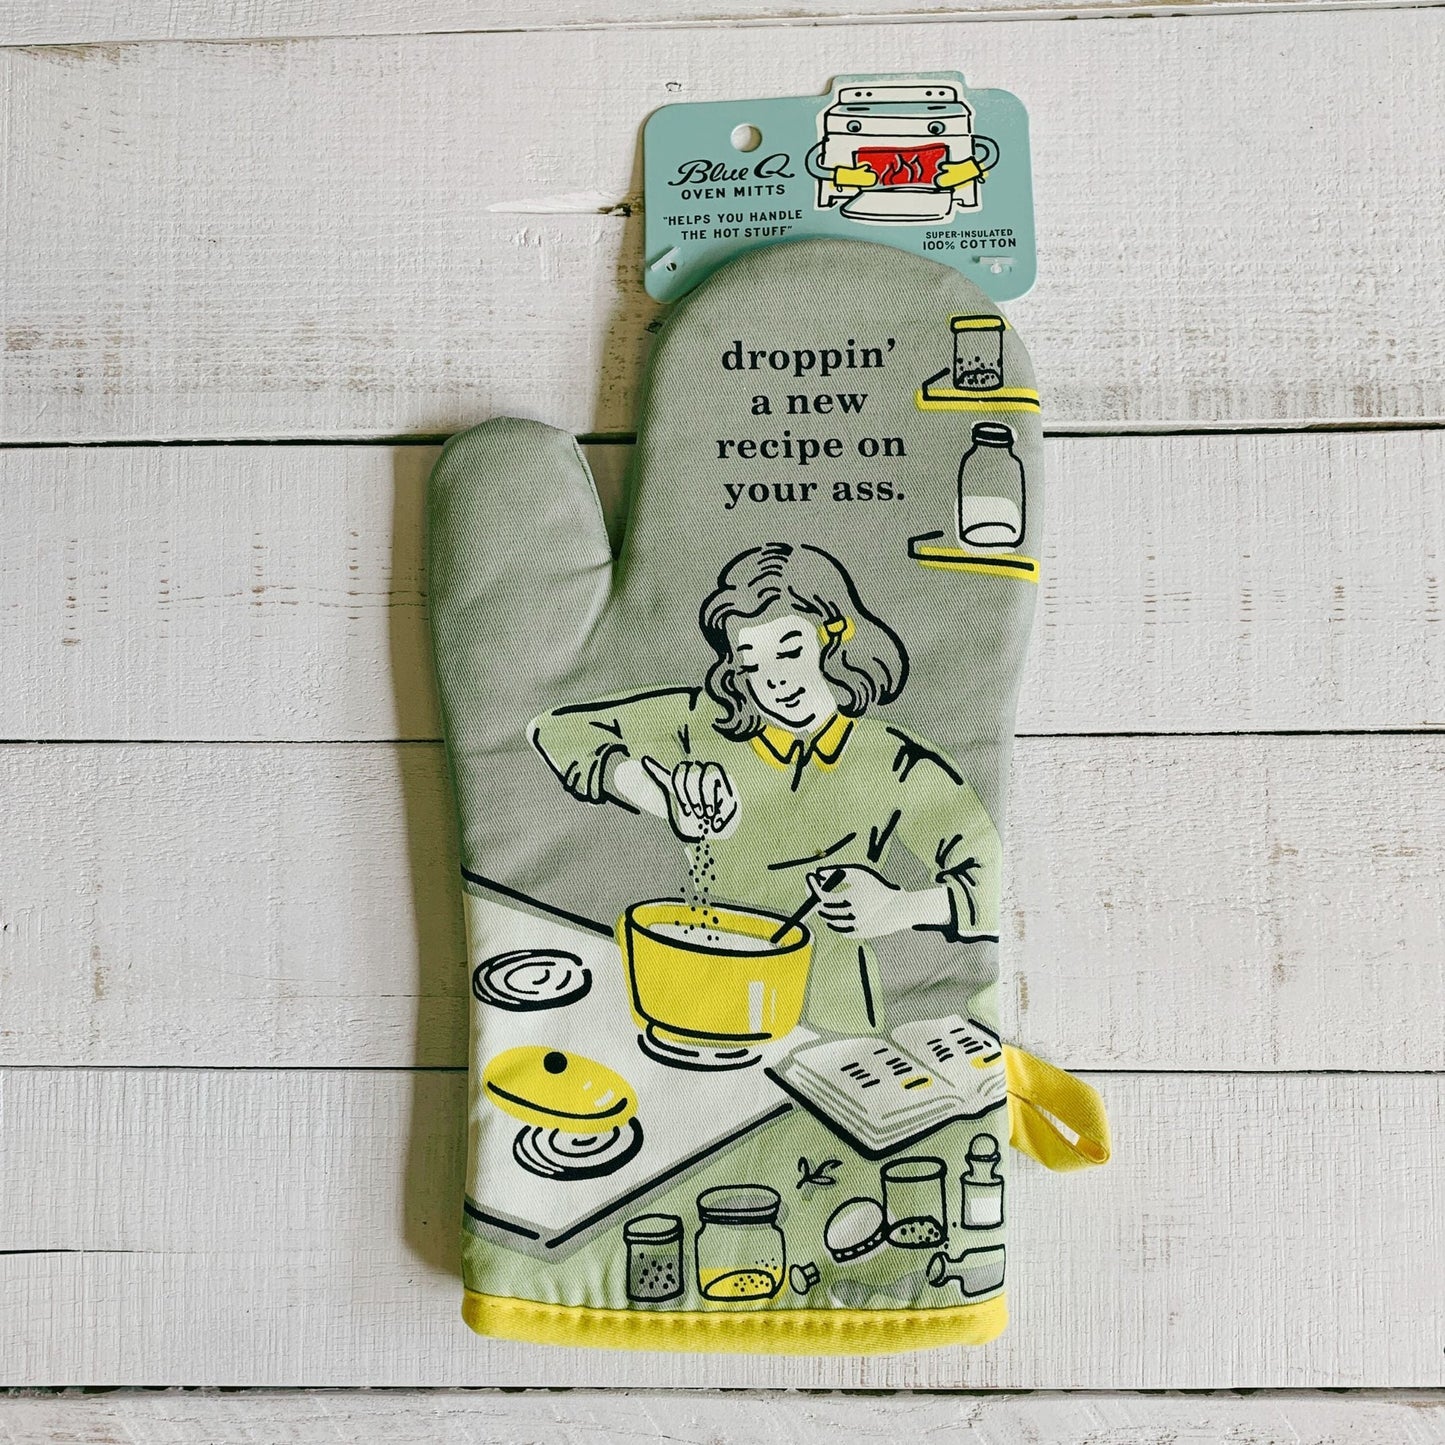 Droppin' a New Recipe on Your Ass Oven Oven Mitt | Kitchen Thermal Single Pot Holder